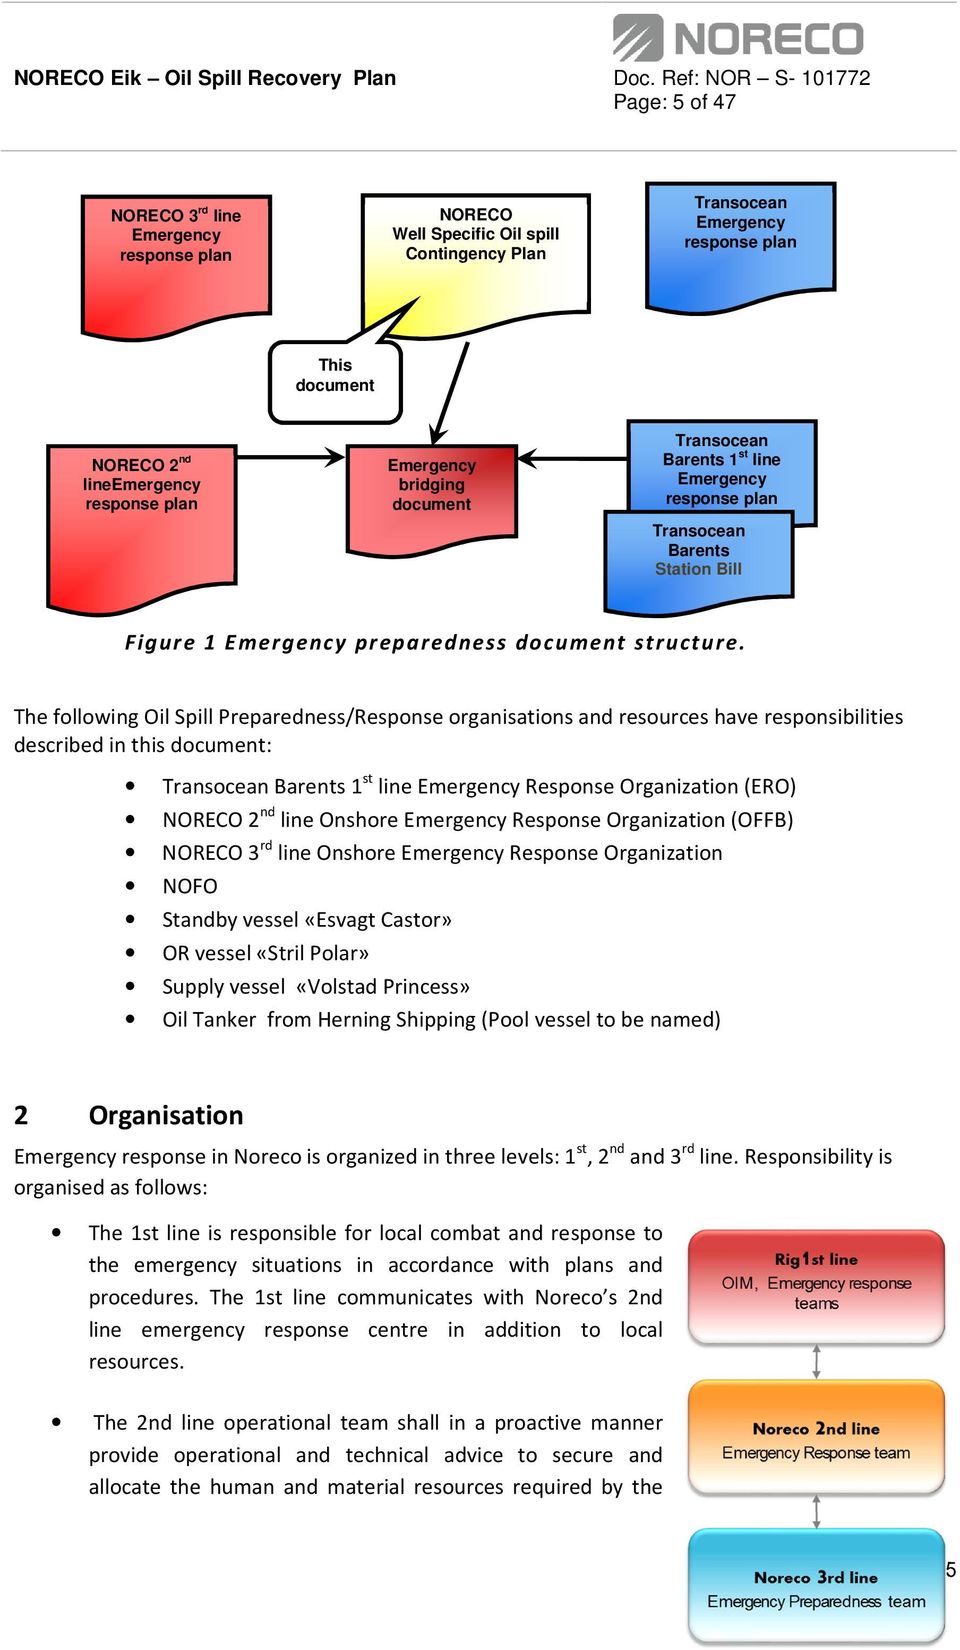 The following Oil Spill Preparedness/Response organisations and resources have responsibilities described in this document: Transocean Barents 1 st line Emergency Response Organization (ERO) NORECO 2